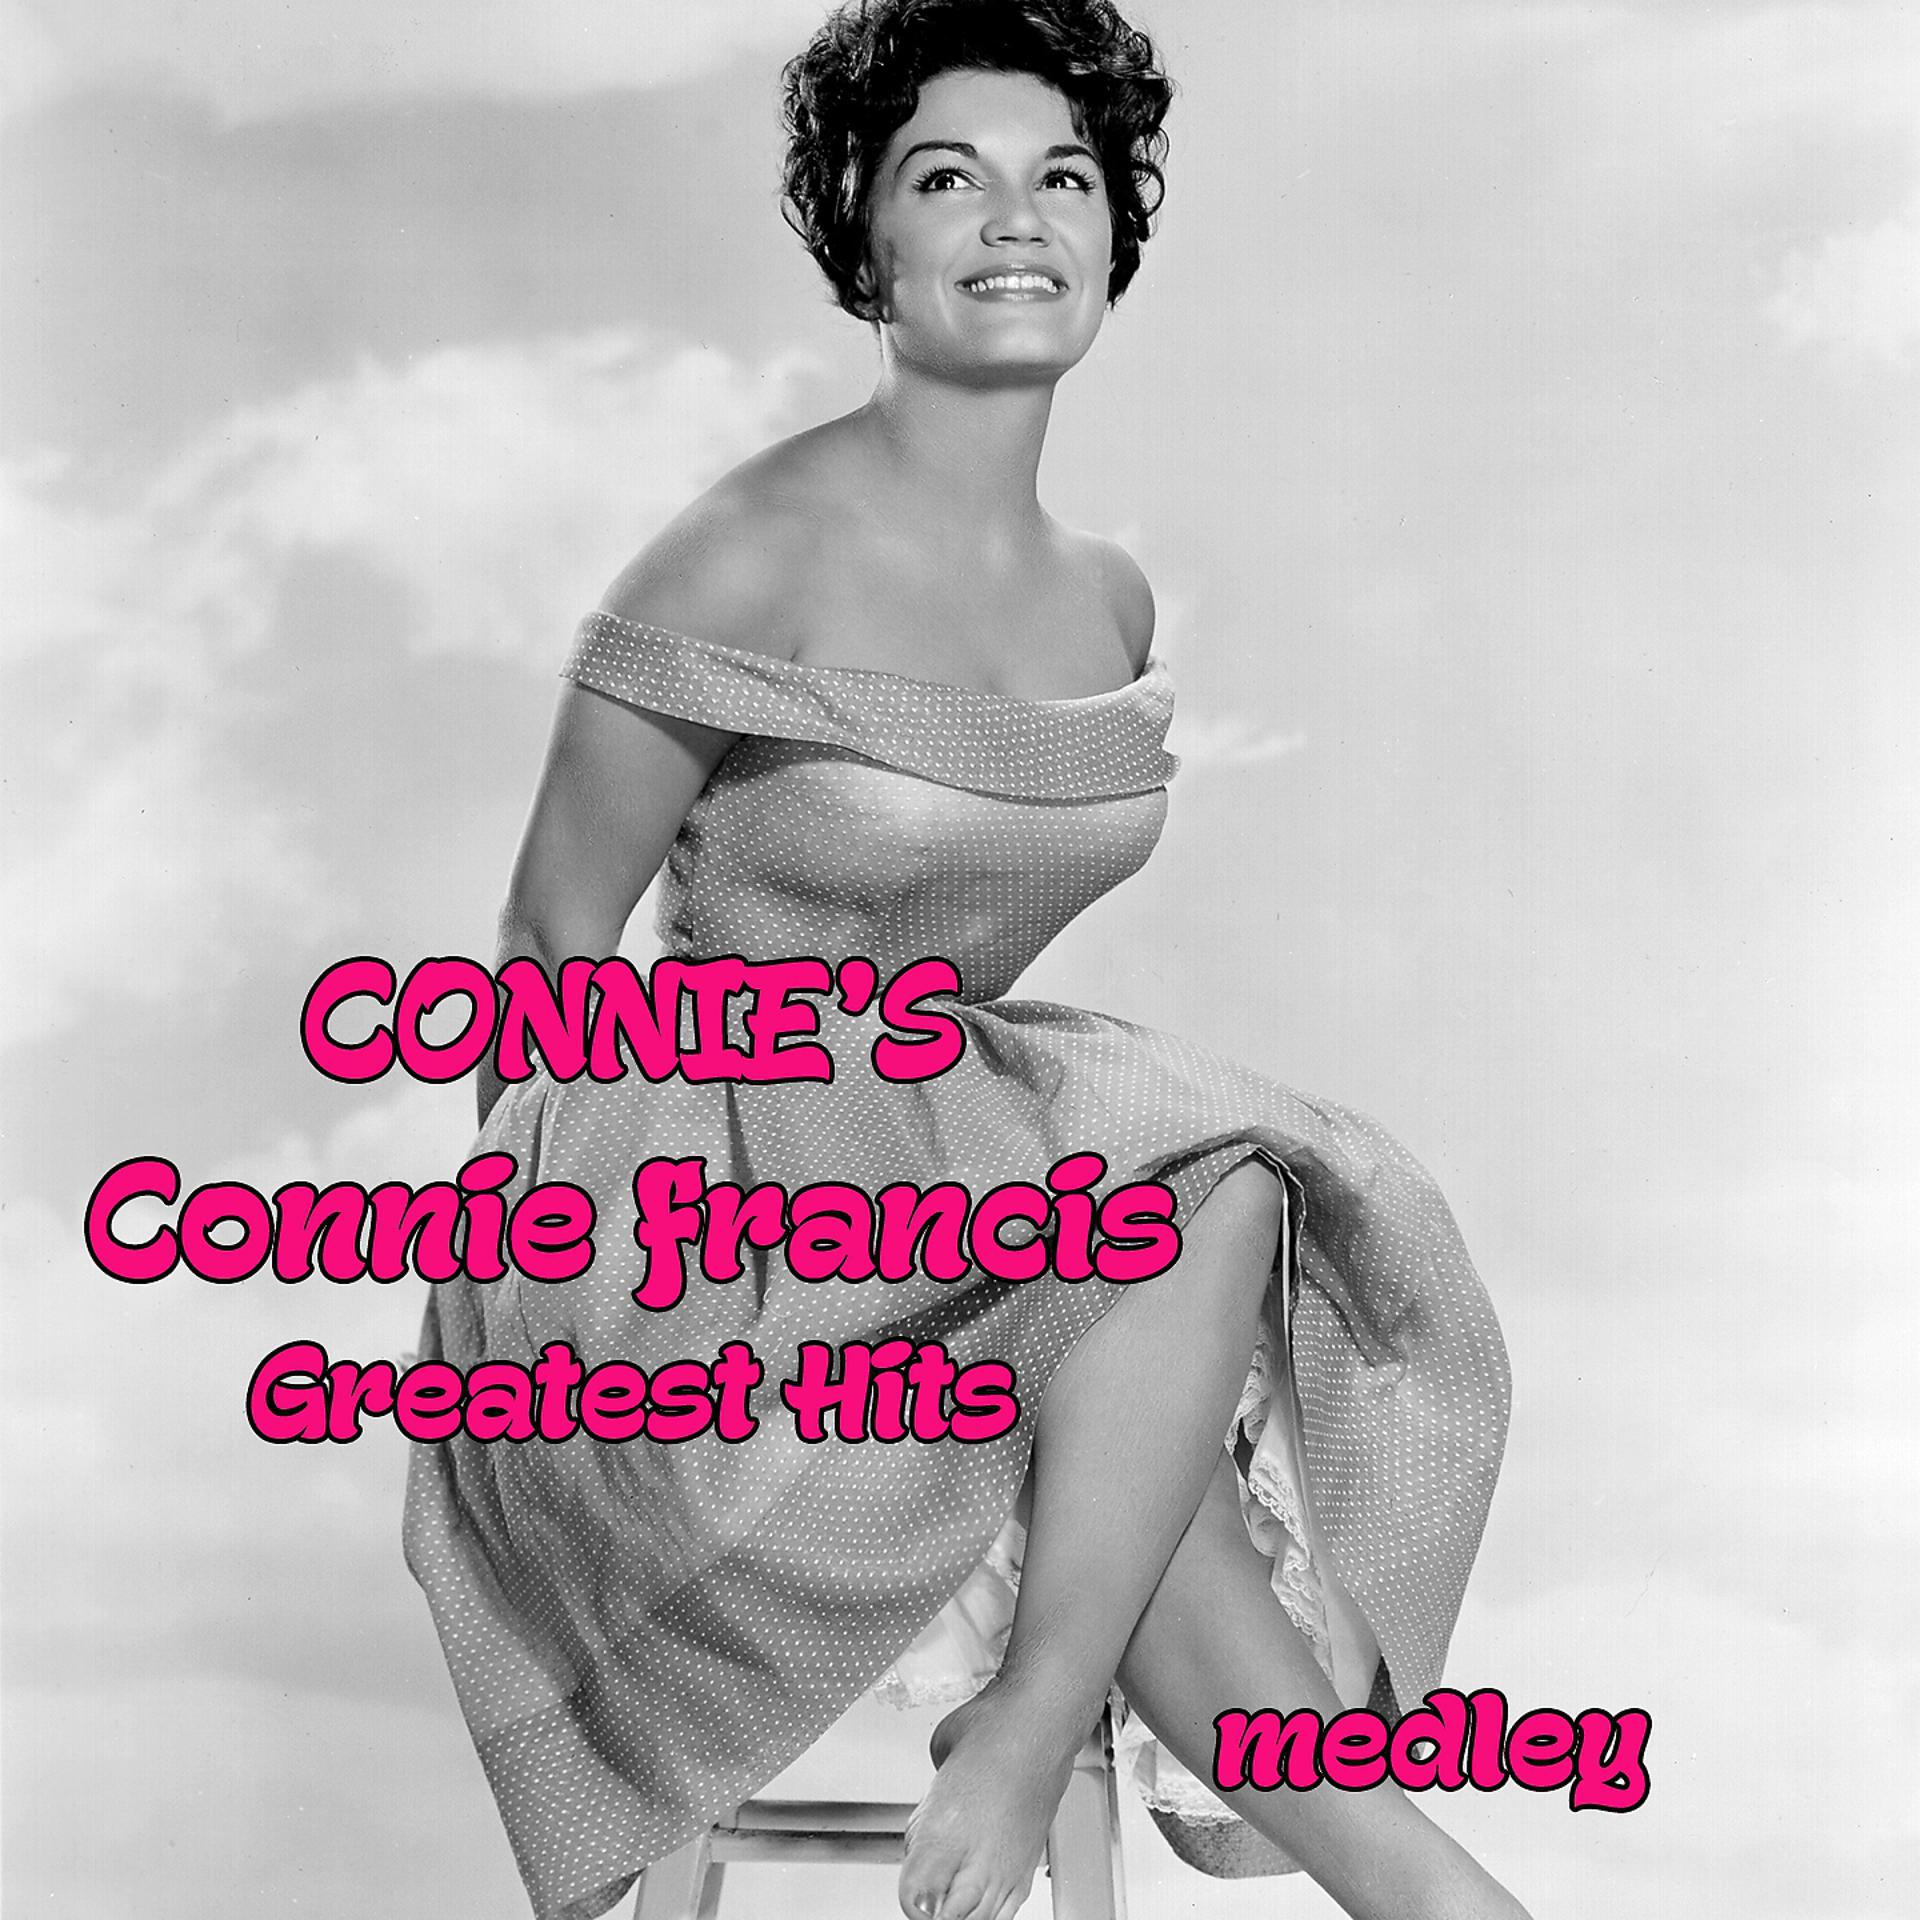 Постер альбома Connie's Greatest Hits Medley: Who's Sorry Now / Fallin' / Happy Days and Lonely Nights / Stupid Cupid / Carolina Moon / Plenty Good Lovin' / Frankie / You're Gonna Miss Me / Lipstick on Your Collar / If I Didn't Care / My Happiness / I'm Sorry I Made You